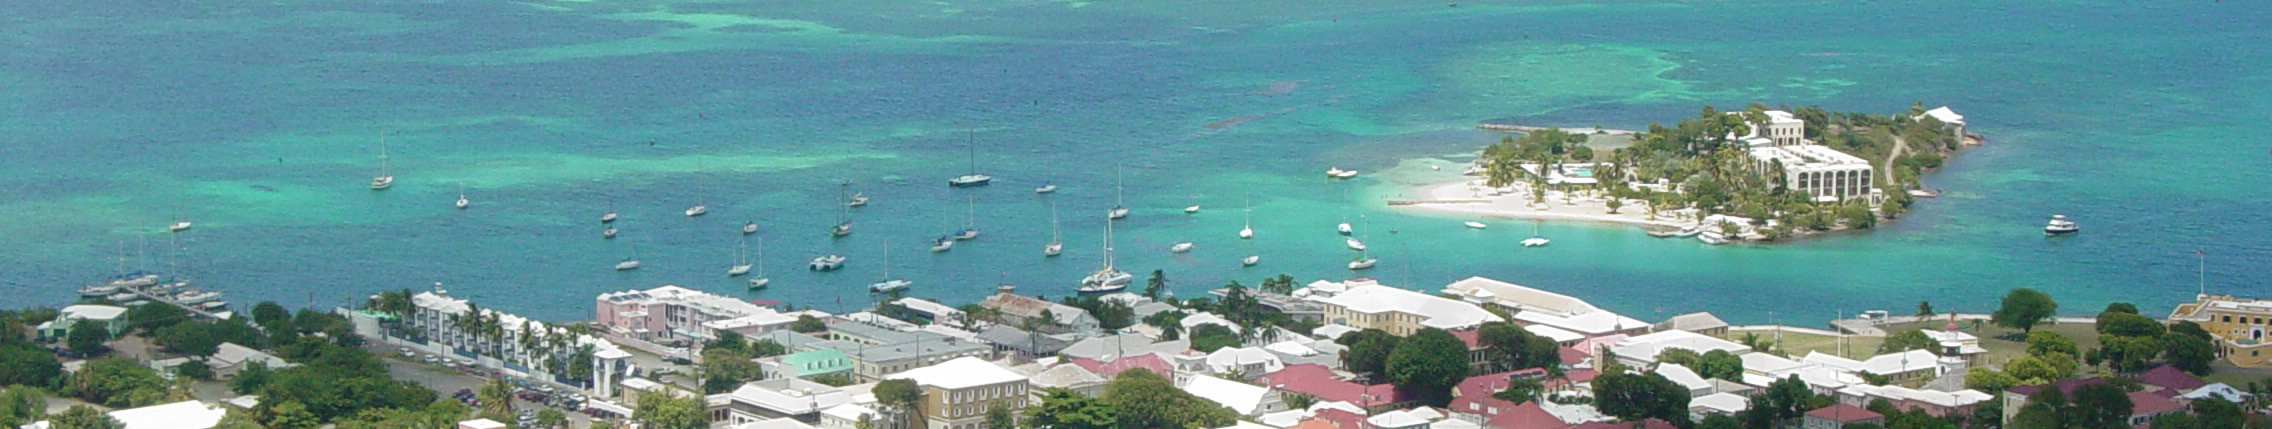 Christiansted harbor